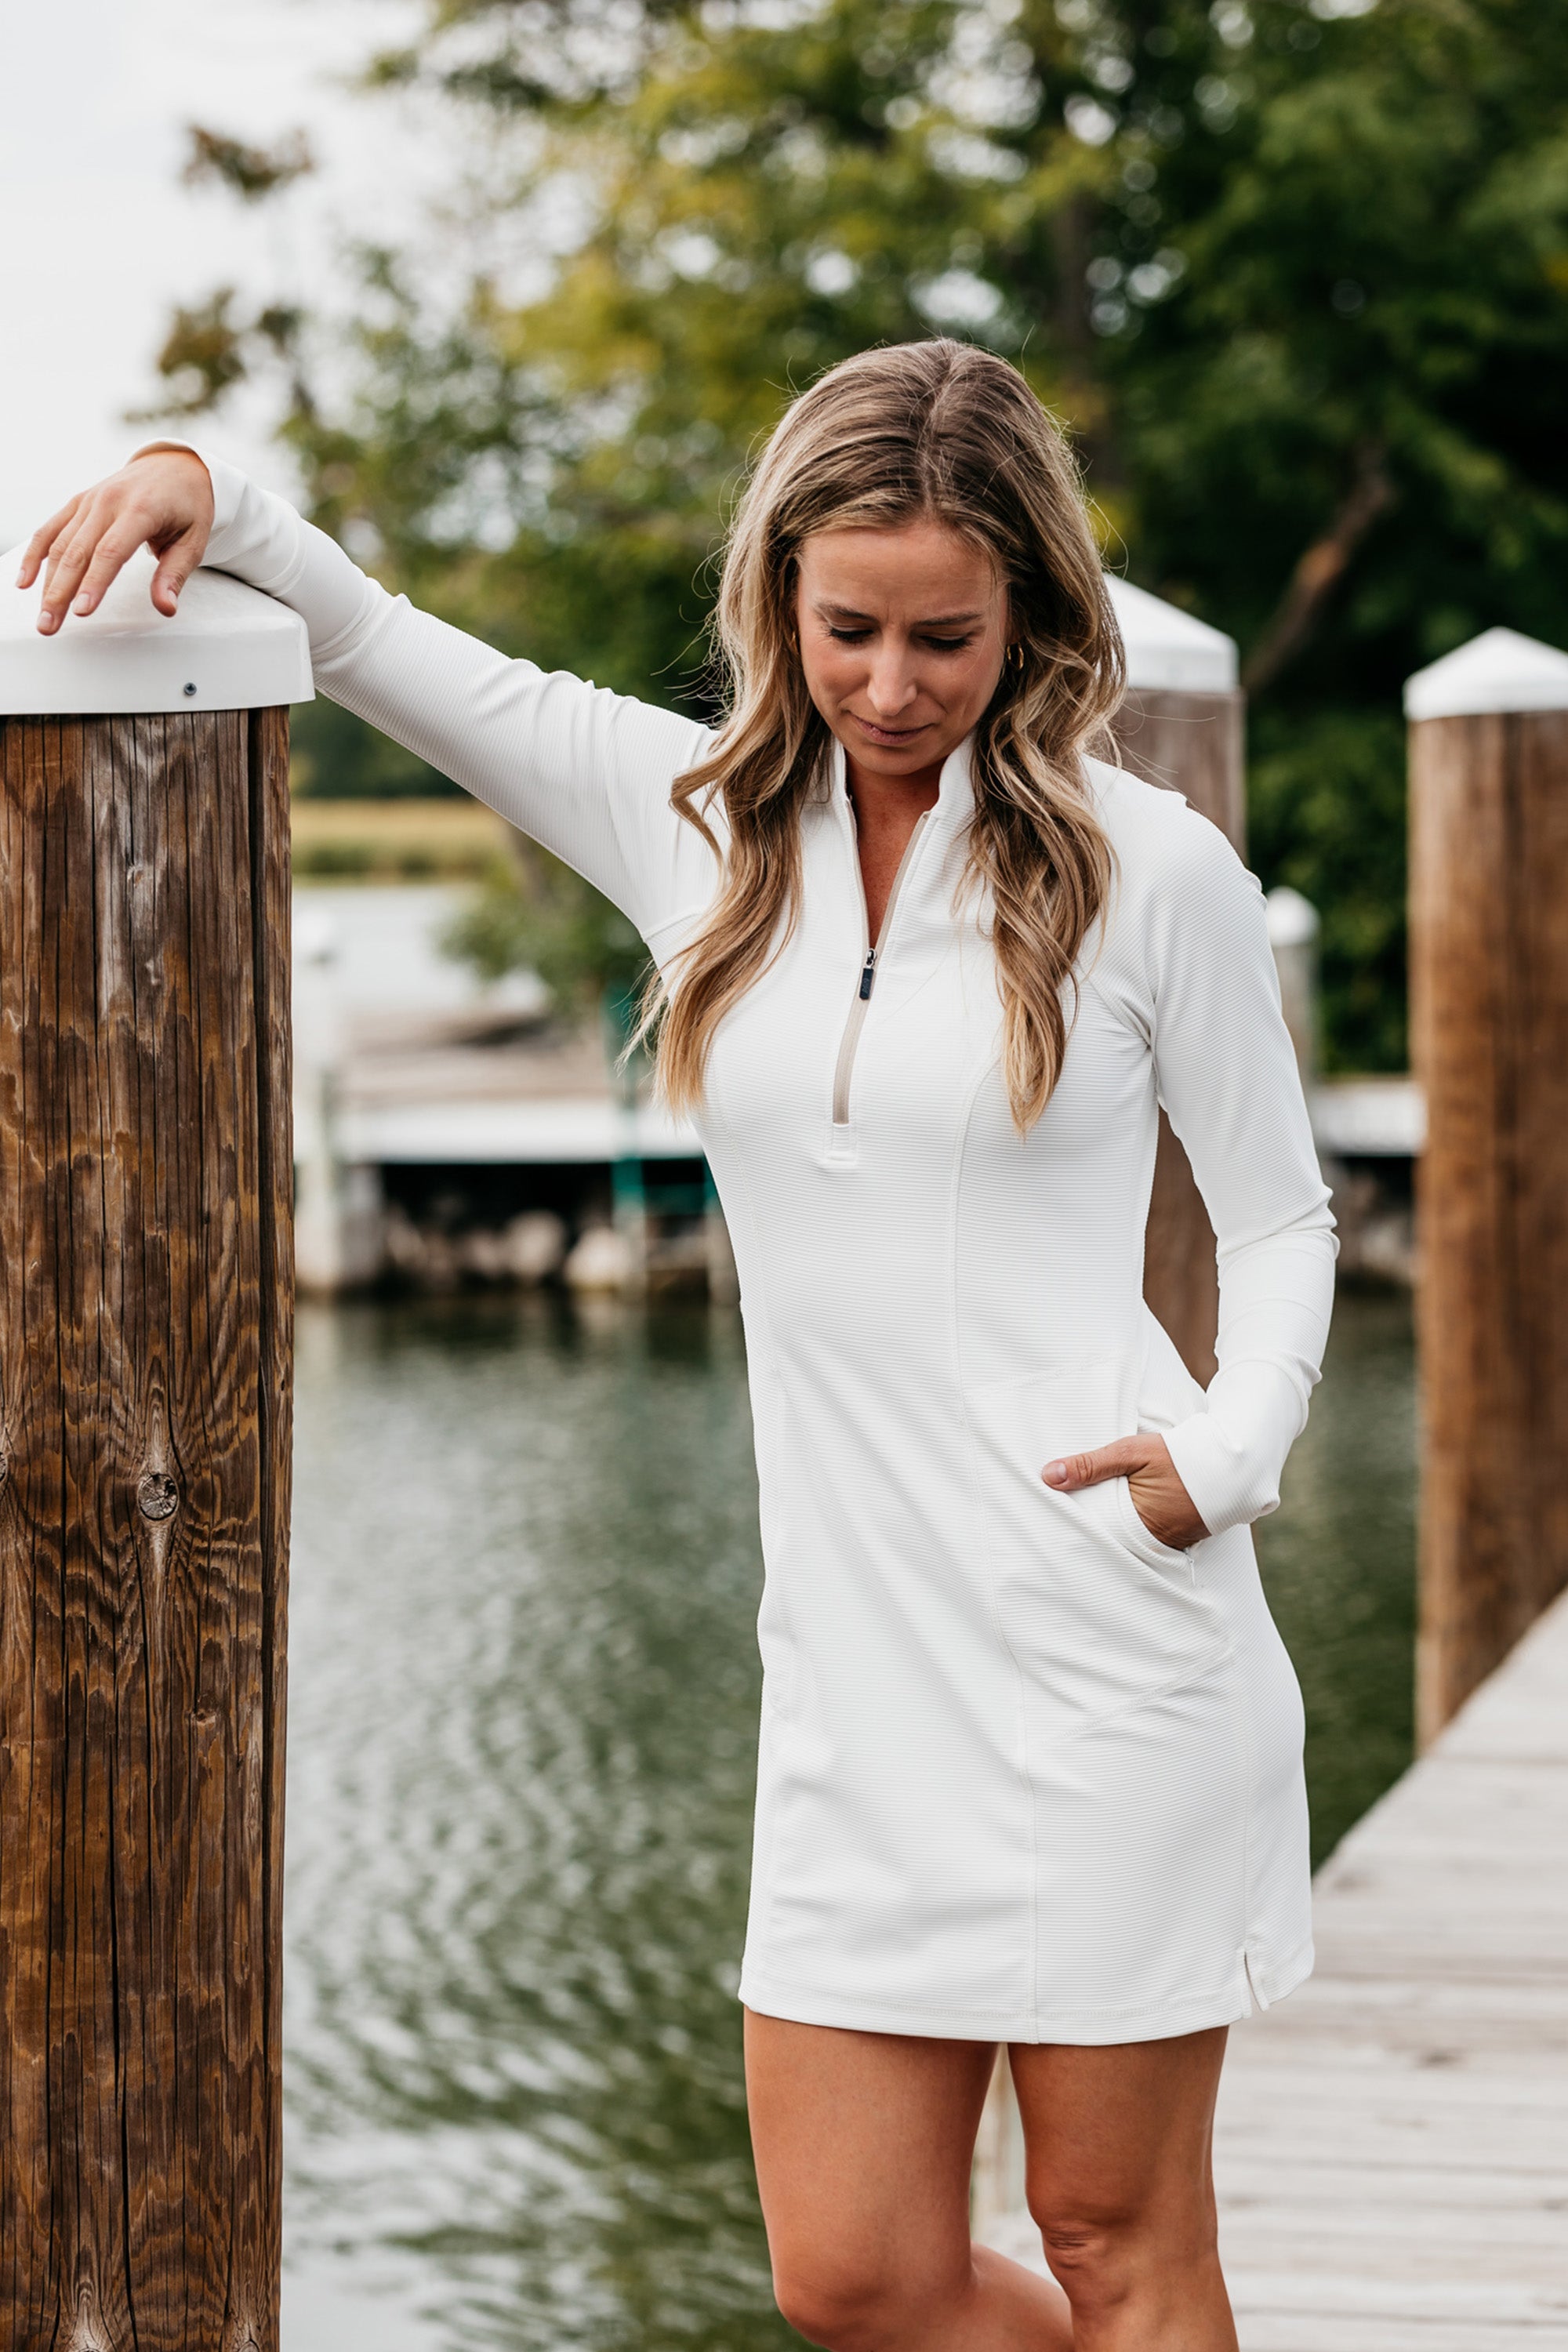 AD Dress & Cover-Up | The MO All Day Dress and Swim Cover